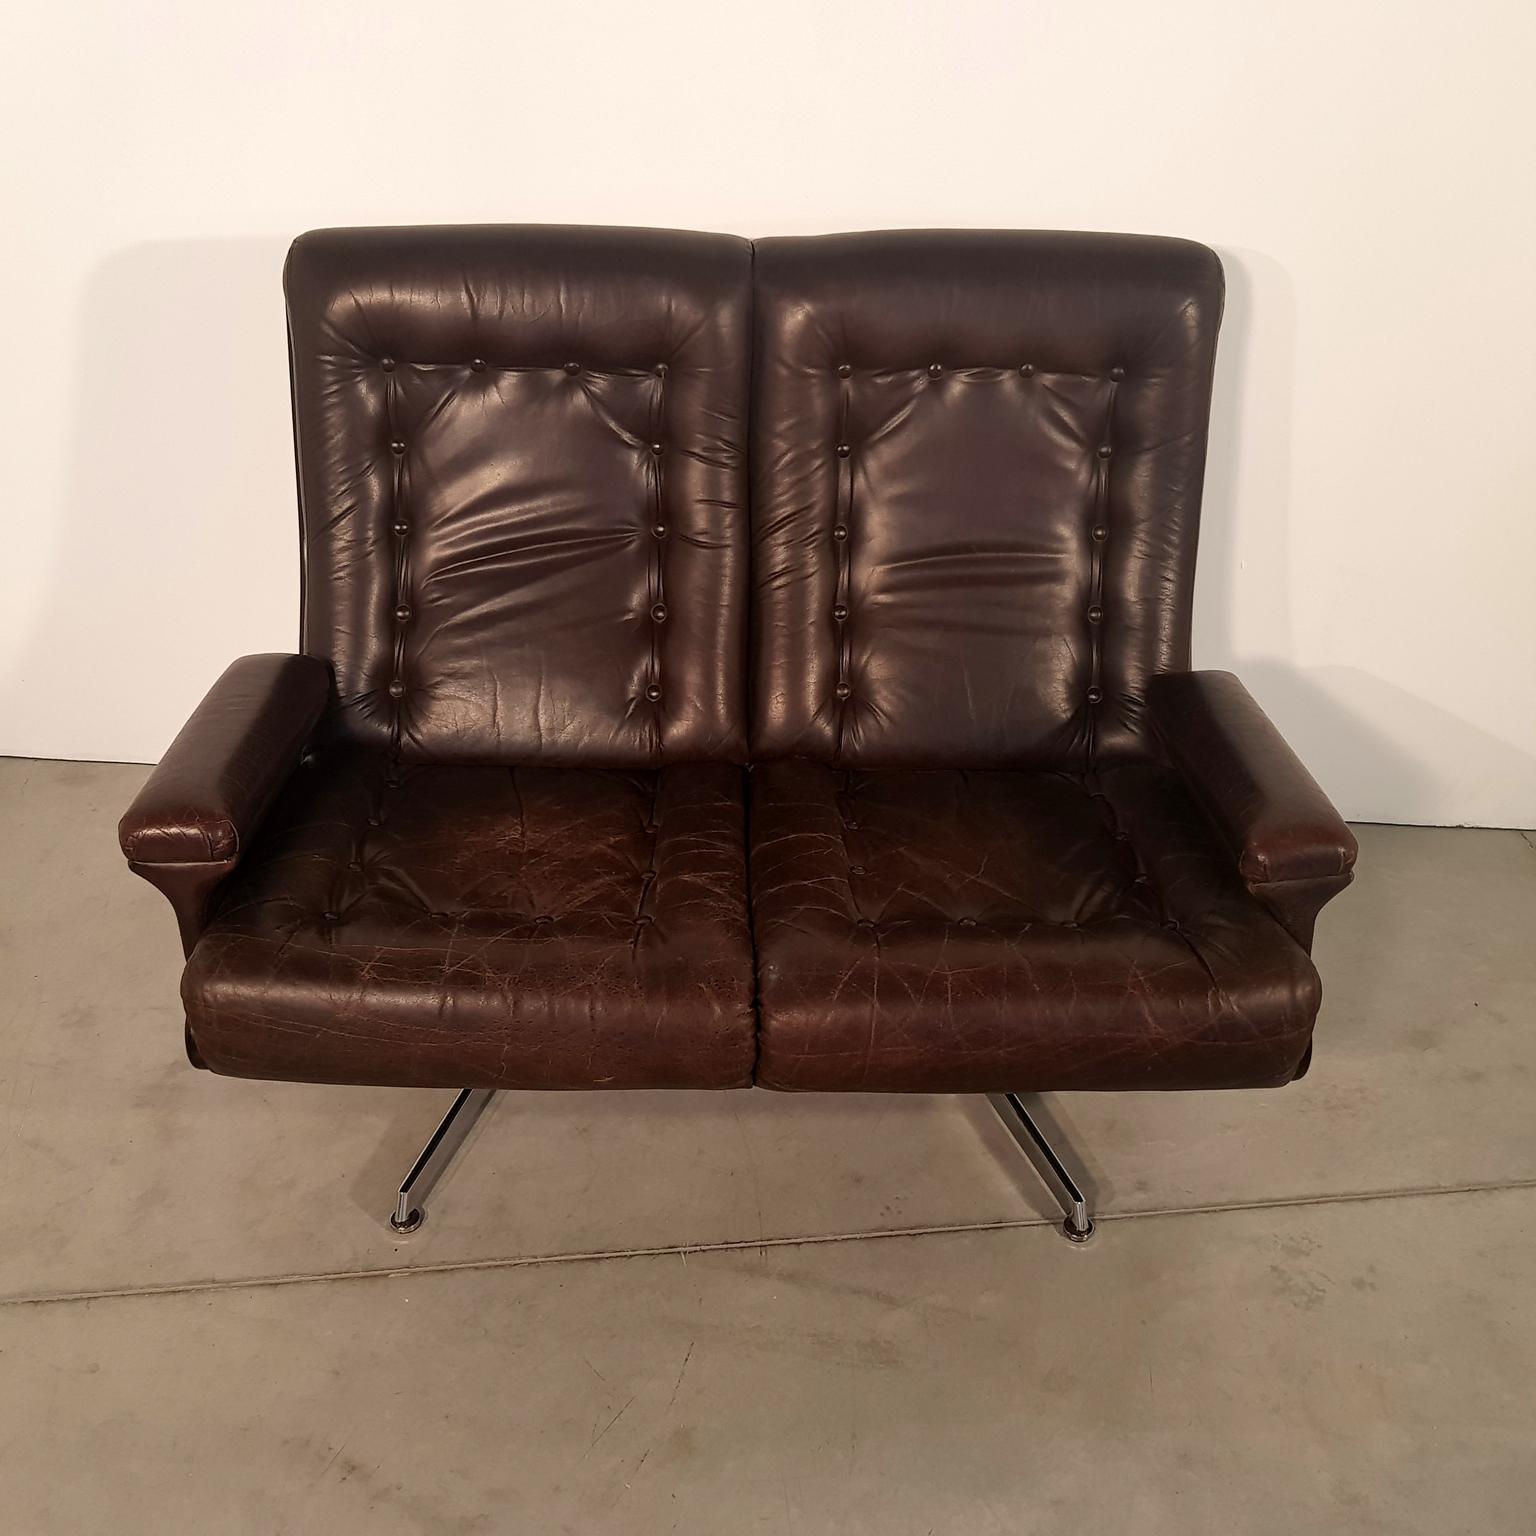 Mid-Century Modern Midcentury Leather Sofa with Chrome Legs, France, 1970s For Sale